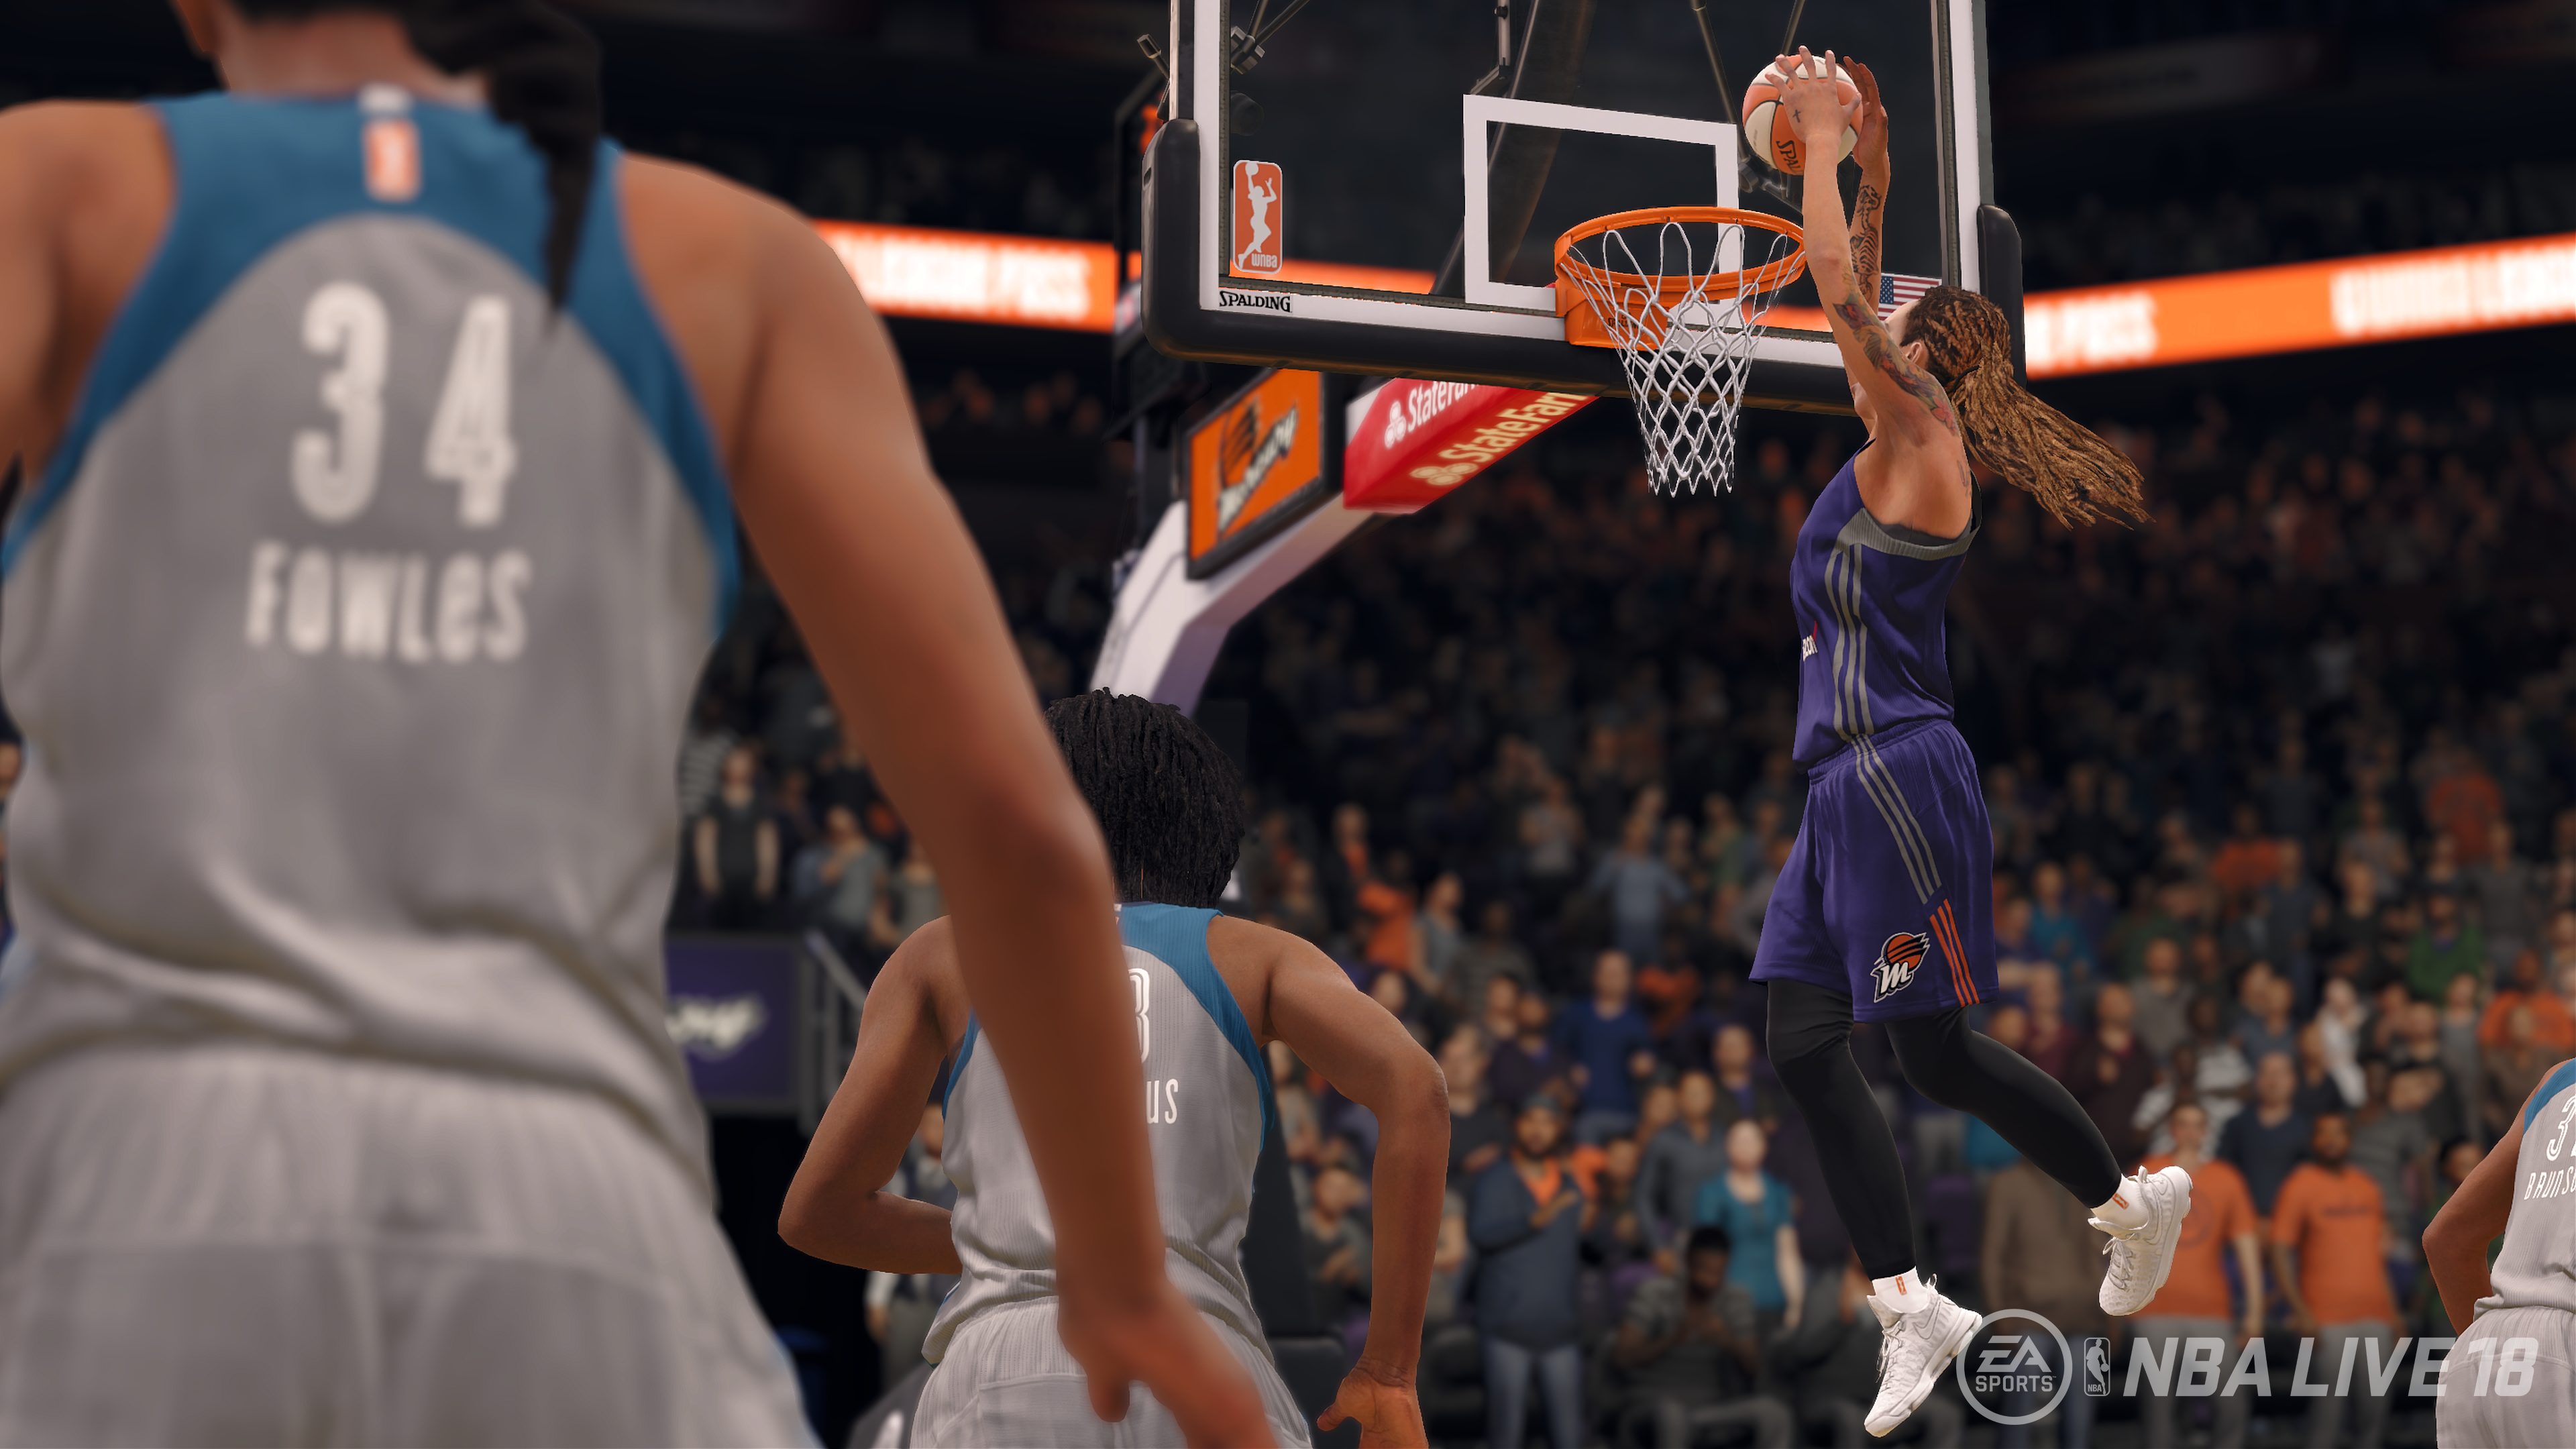 WNBA players and rosters make debut in NBA Live series